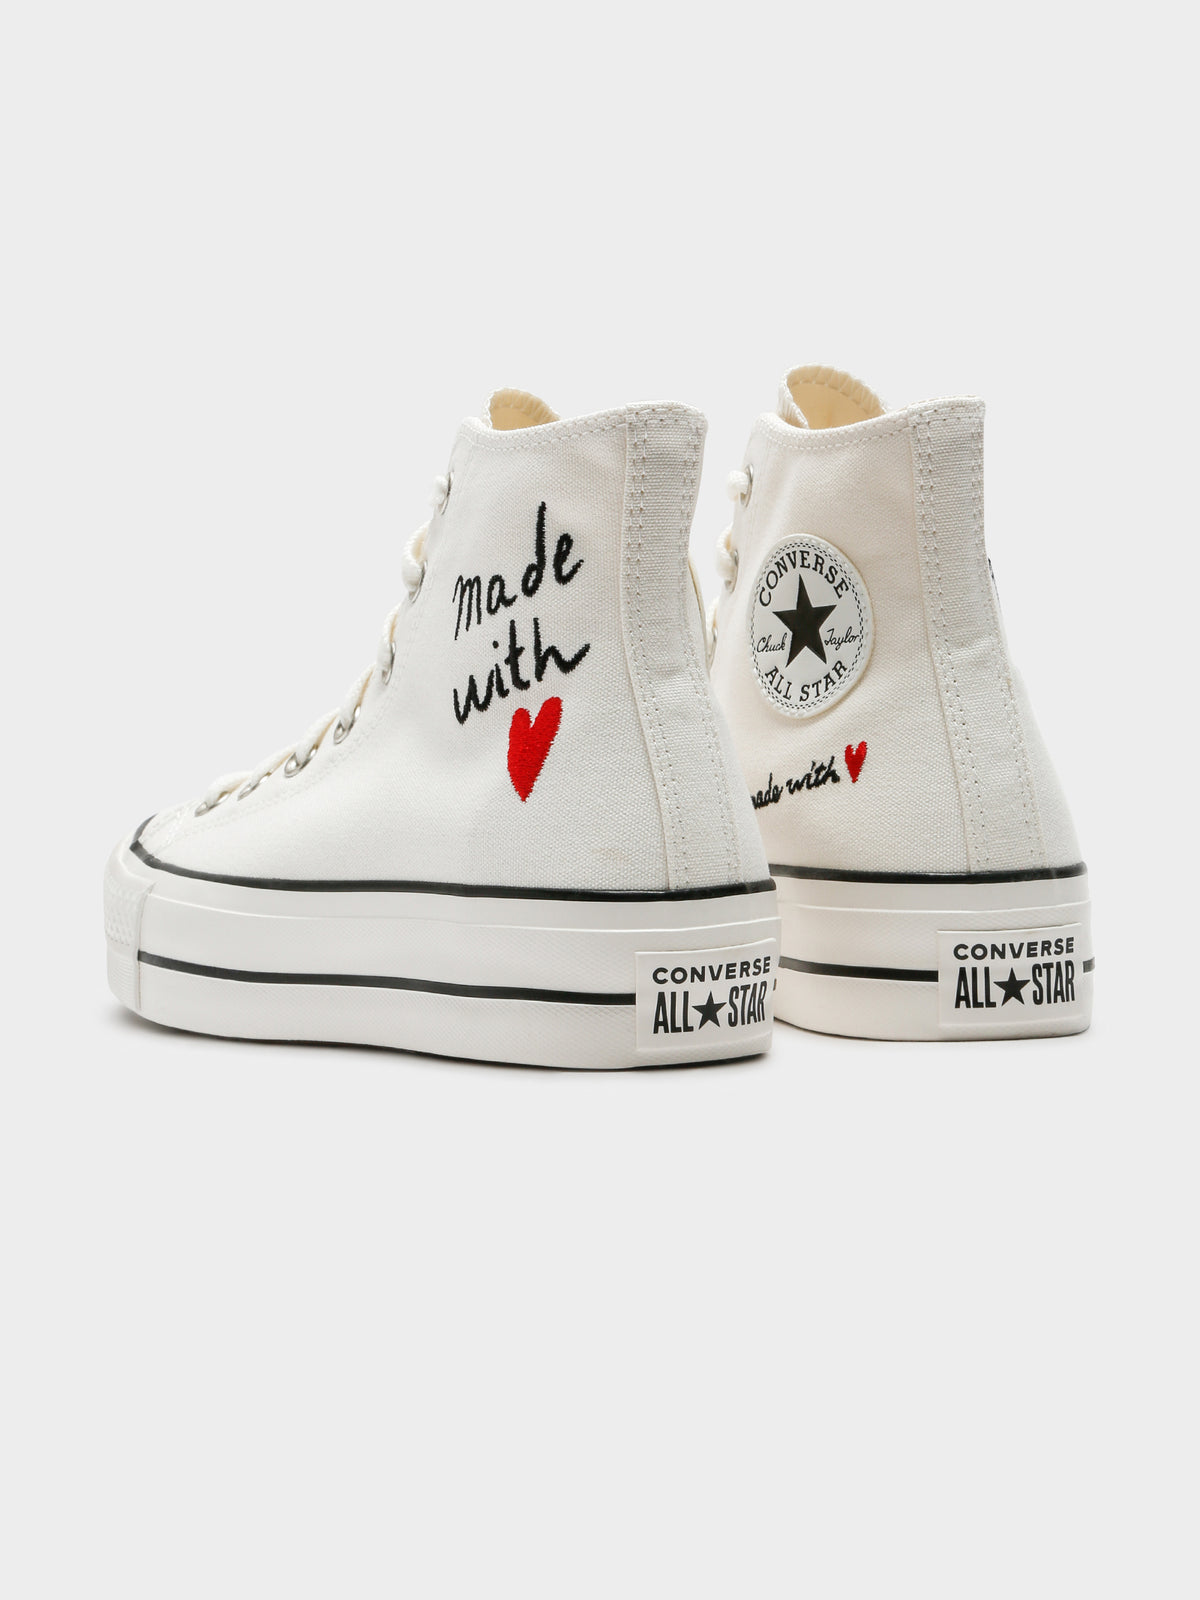 Womens Made With Love Platform Chuck Taylor All Star High Top Sneakers in Vintage White